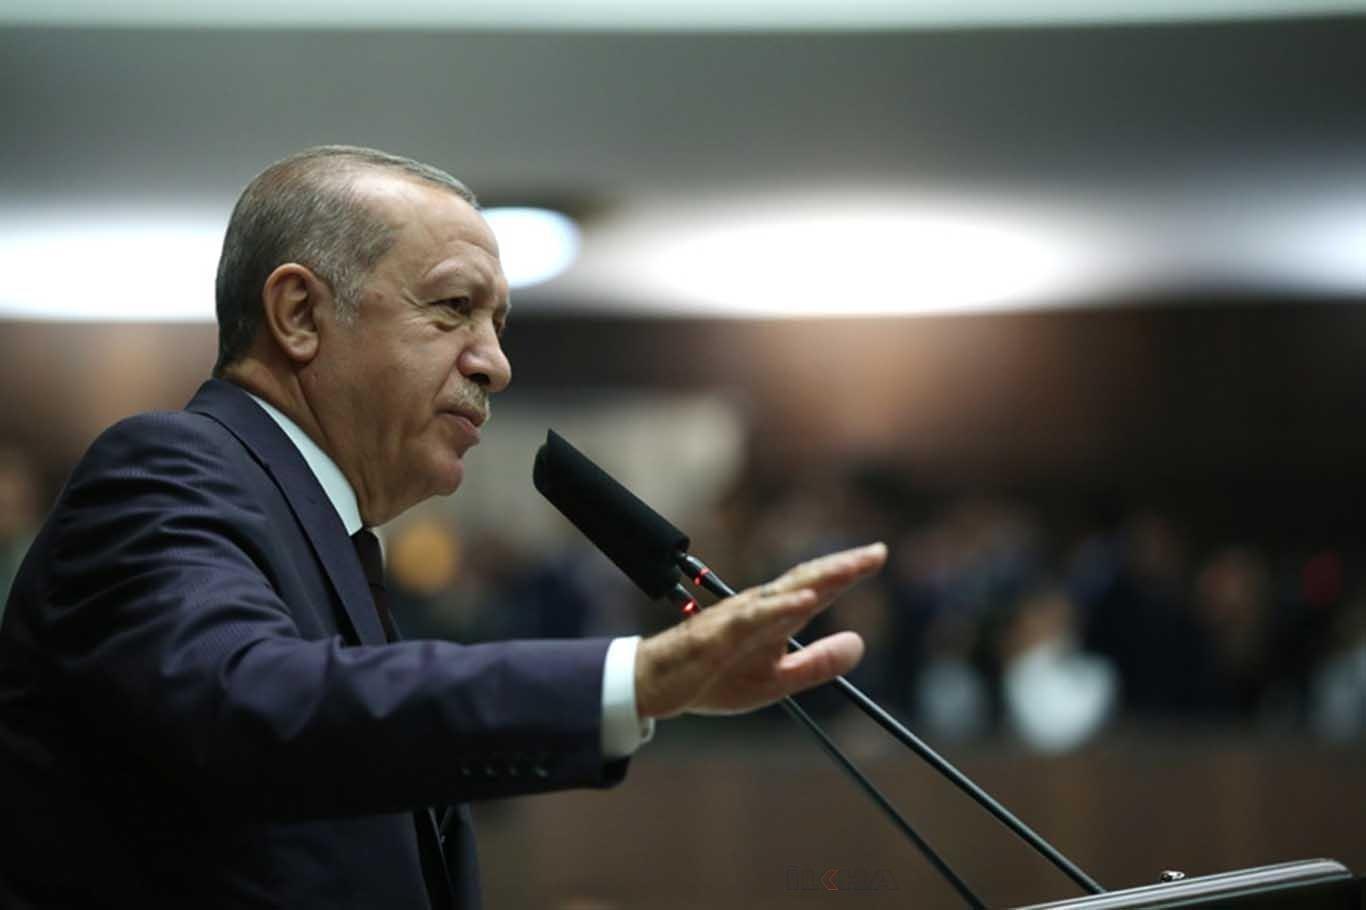 Erdoğan issues a statement about black American Floyd’s death from police violence